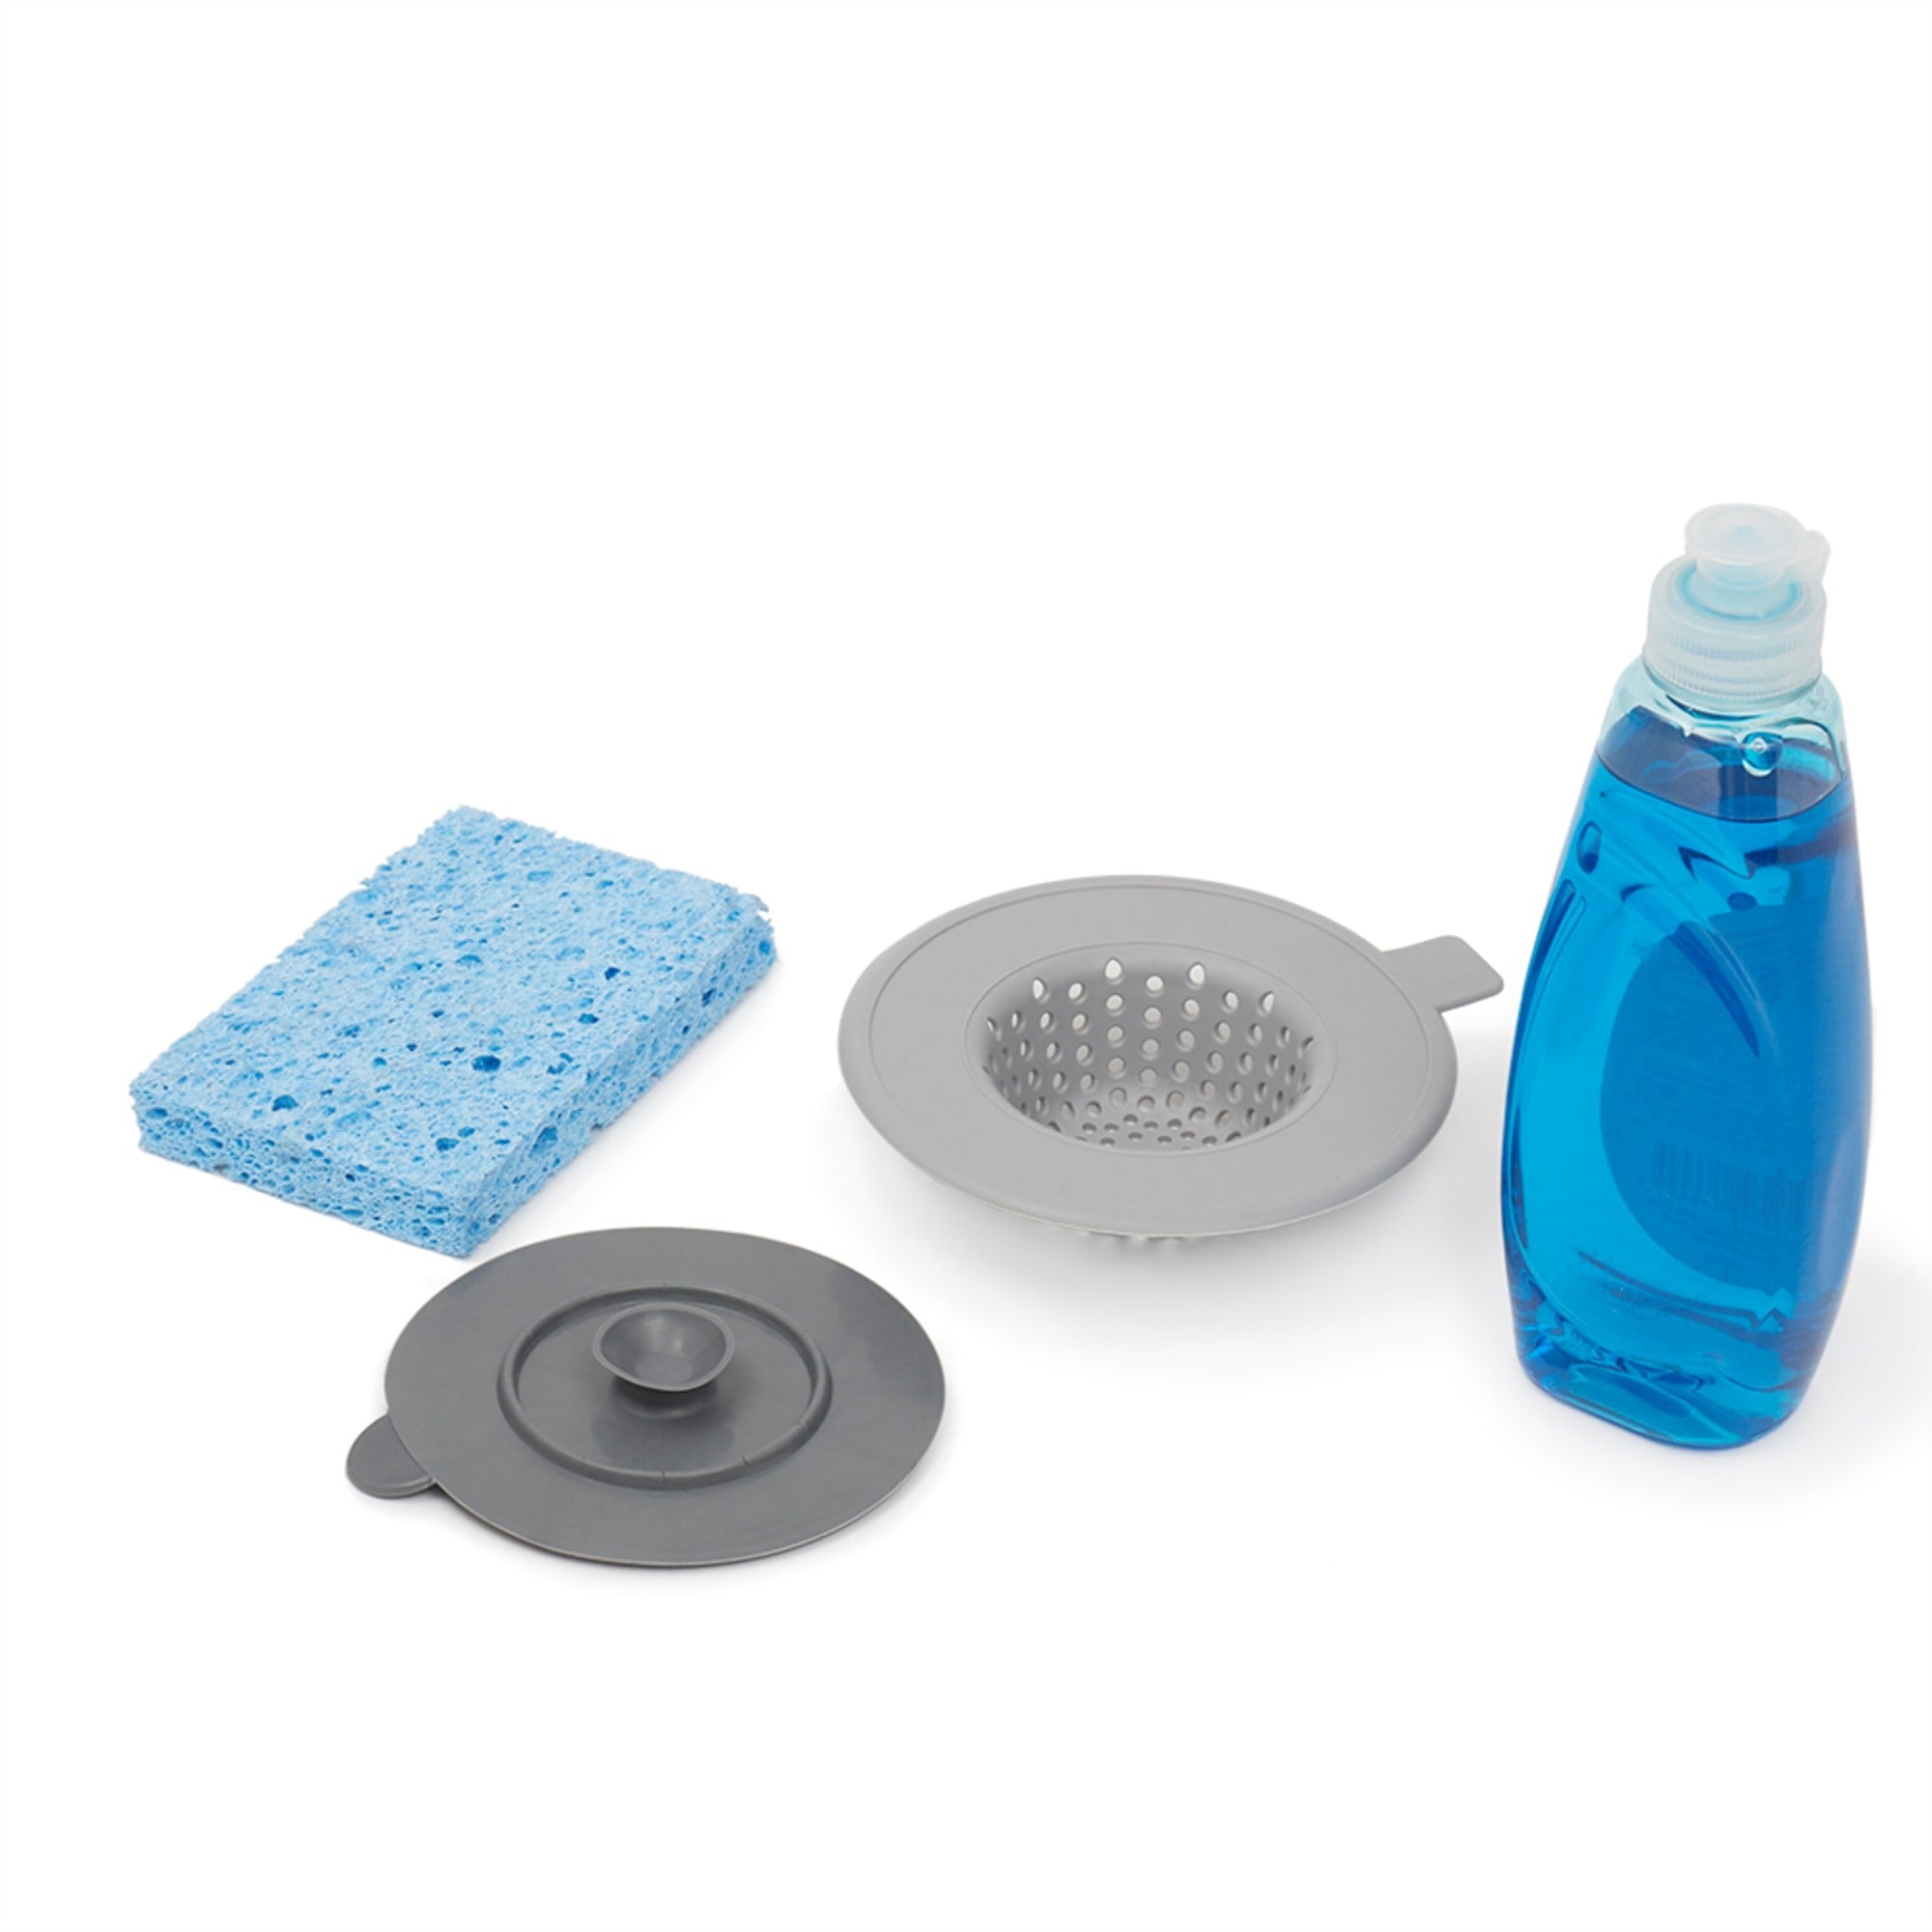 Home Basics Silicone Sink Strainer and Stopper, Grey $2.50 EACH, CASE PACK OF 48